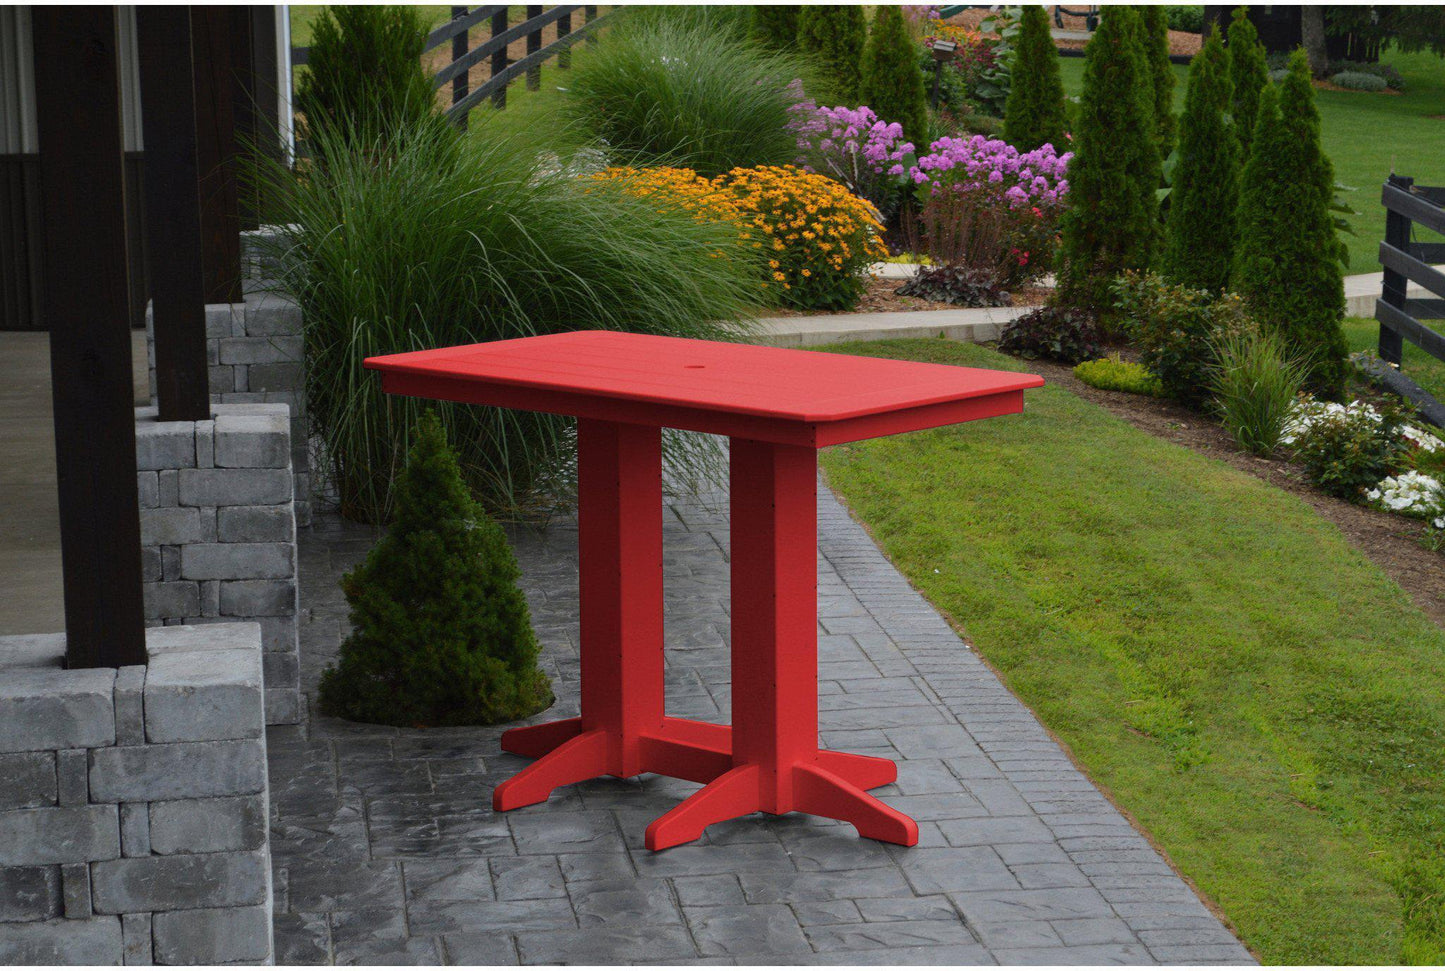 A&L Furniture Recycled Plastic 5' Bar Table - Bright Red